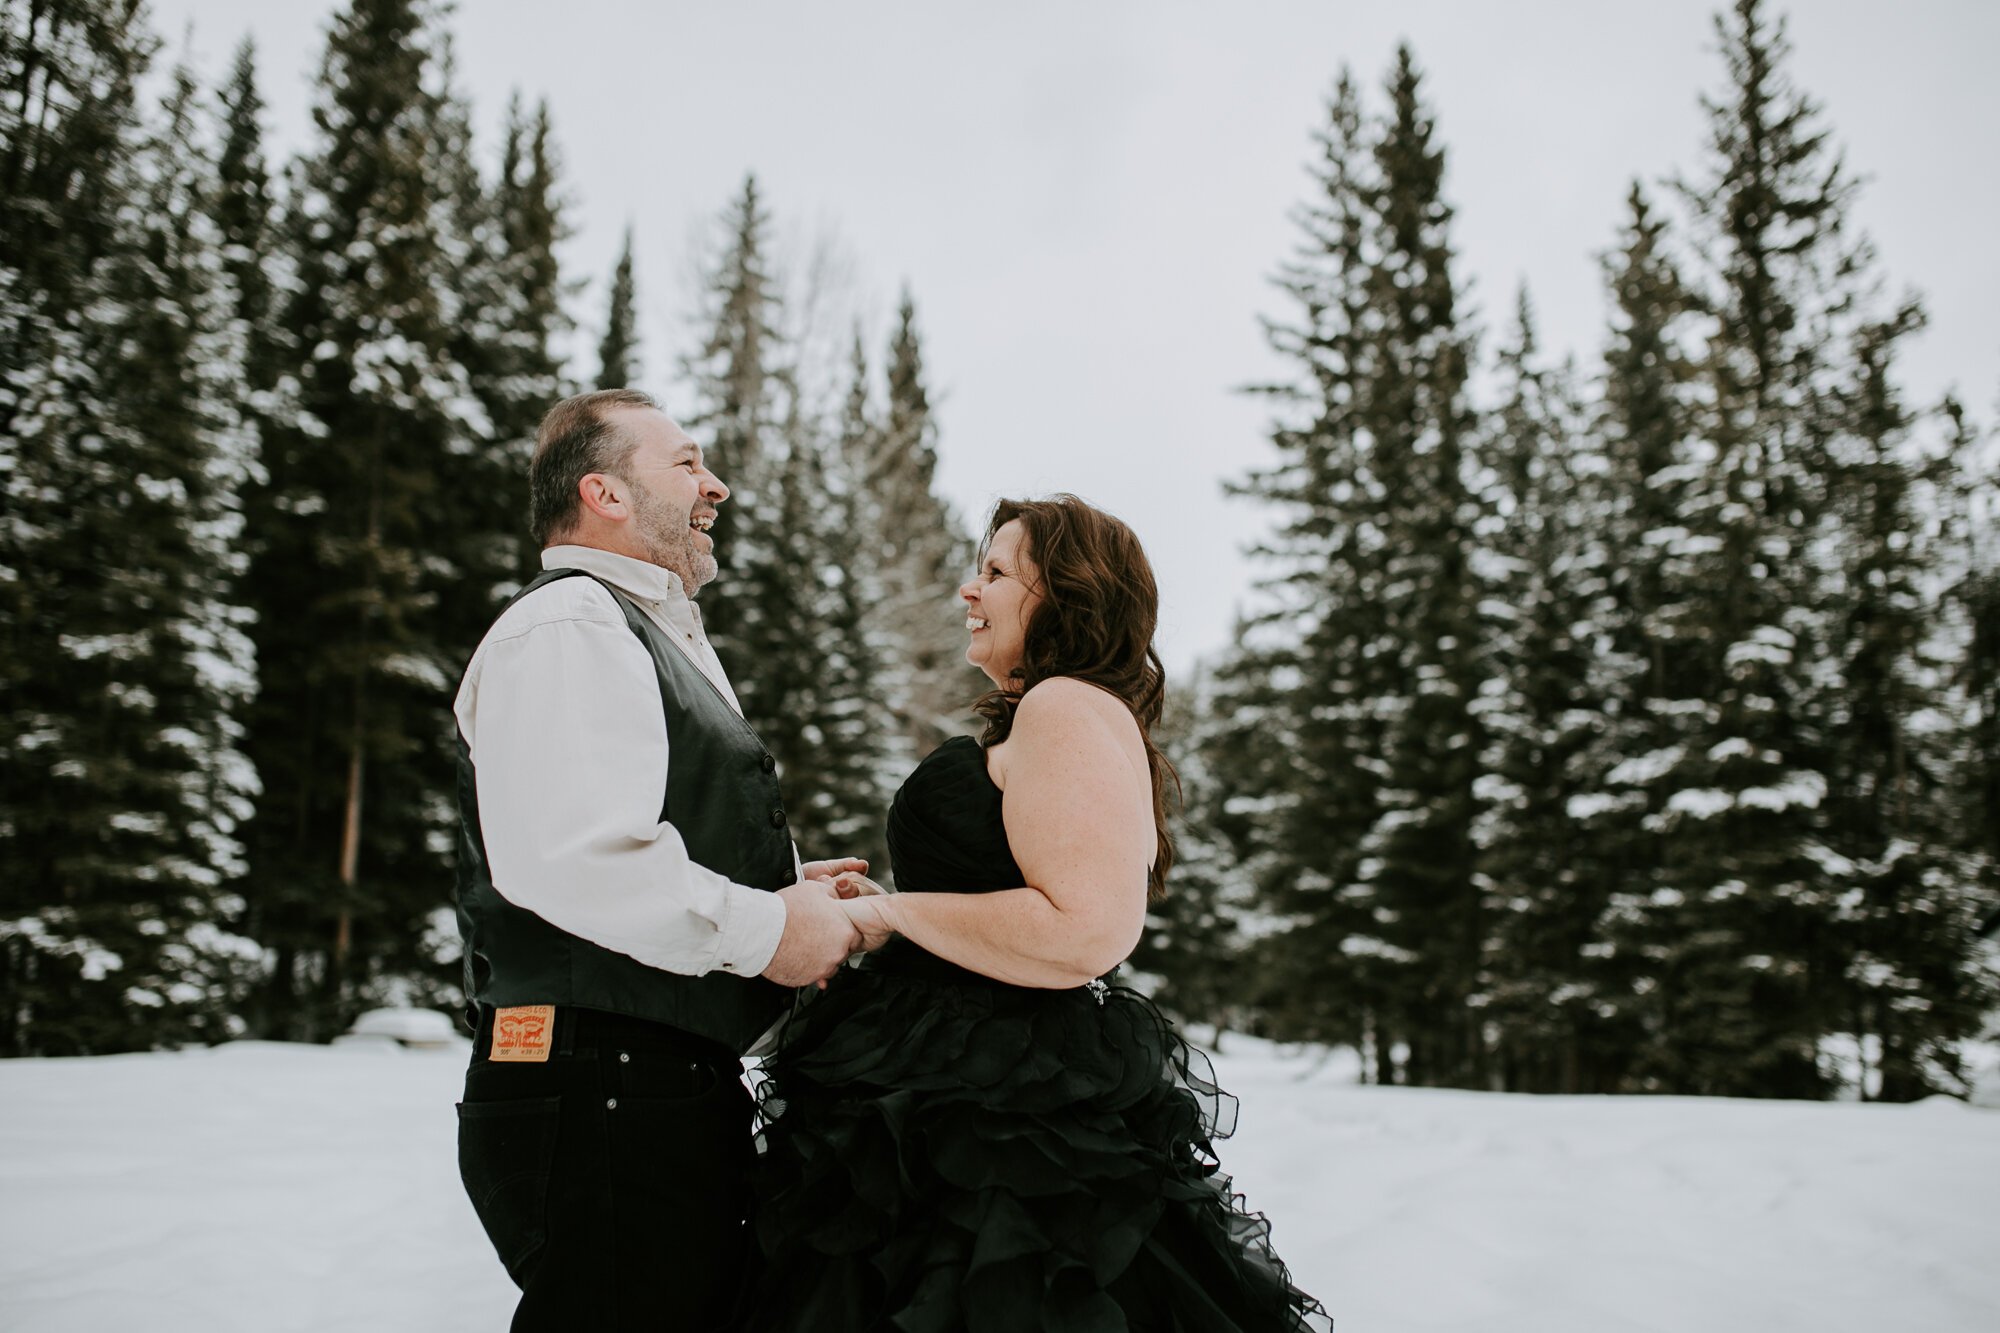  To celebrate 20 years together, these two decided to drive from Virginia to exchange vows continuing in the Rocky Mountains. This moment is one of my favourites from their day - nothing beats those smiles.  